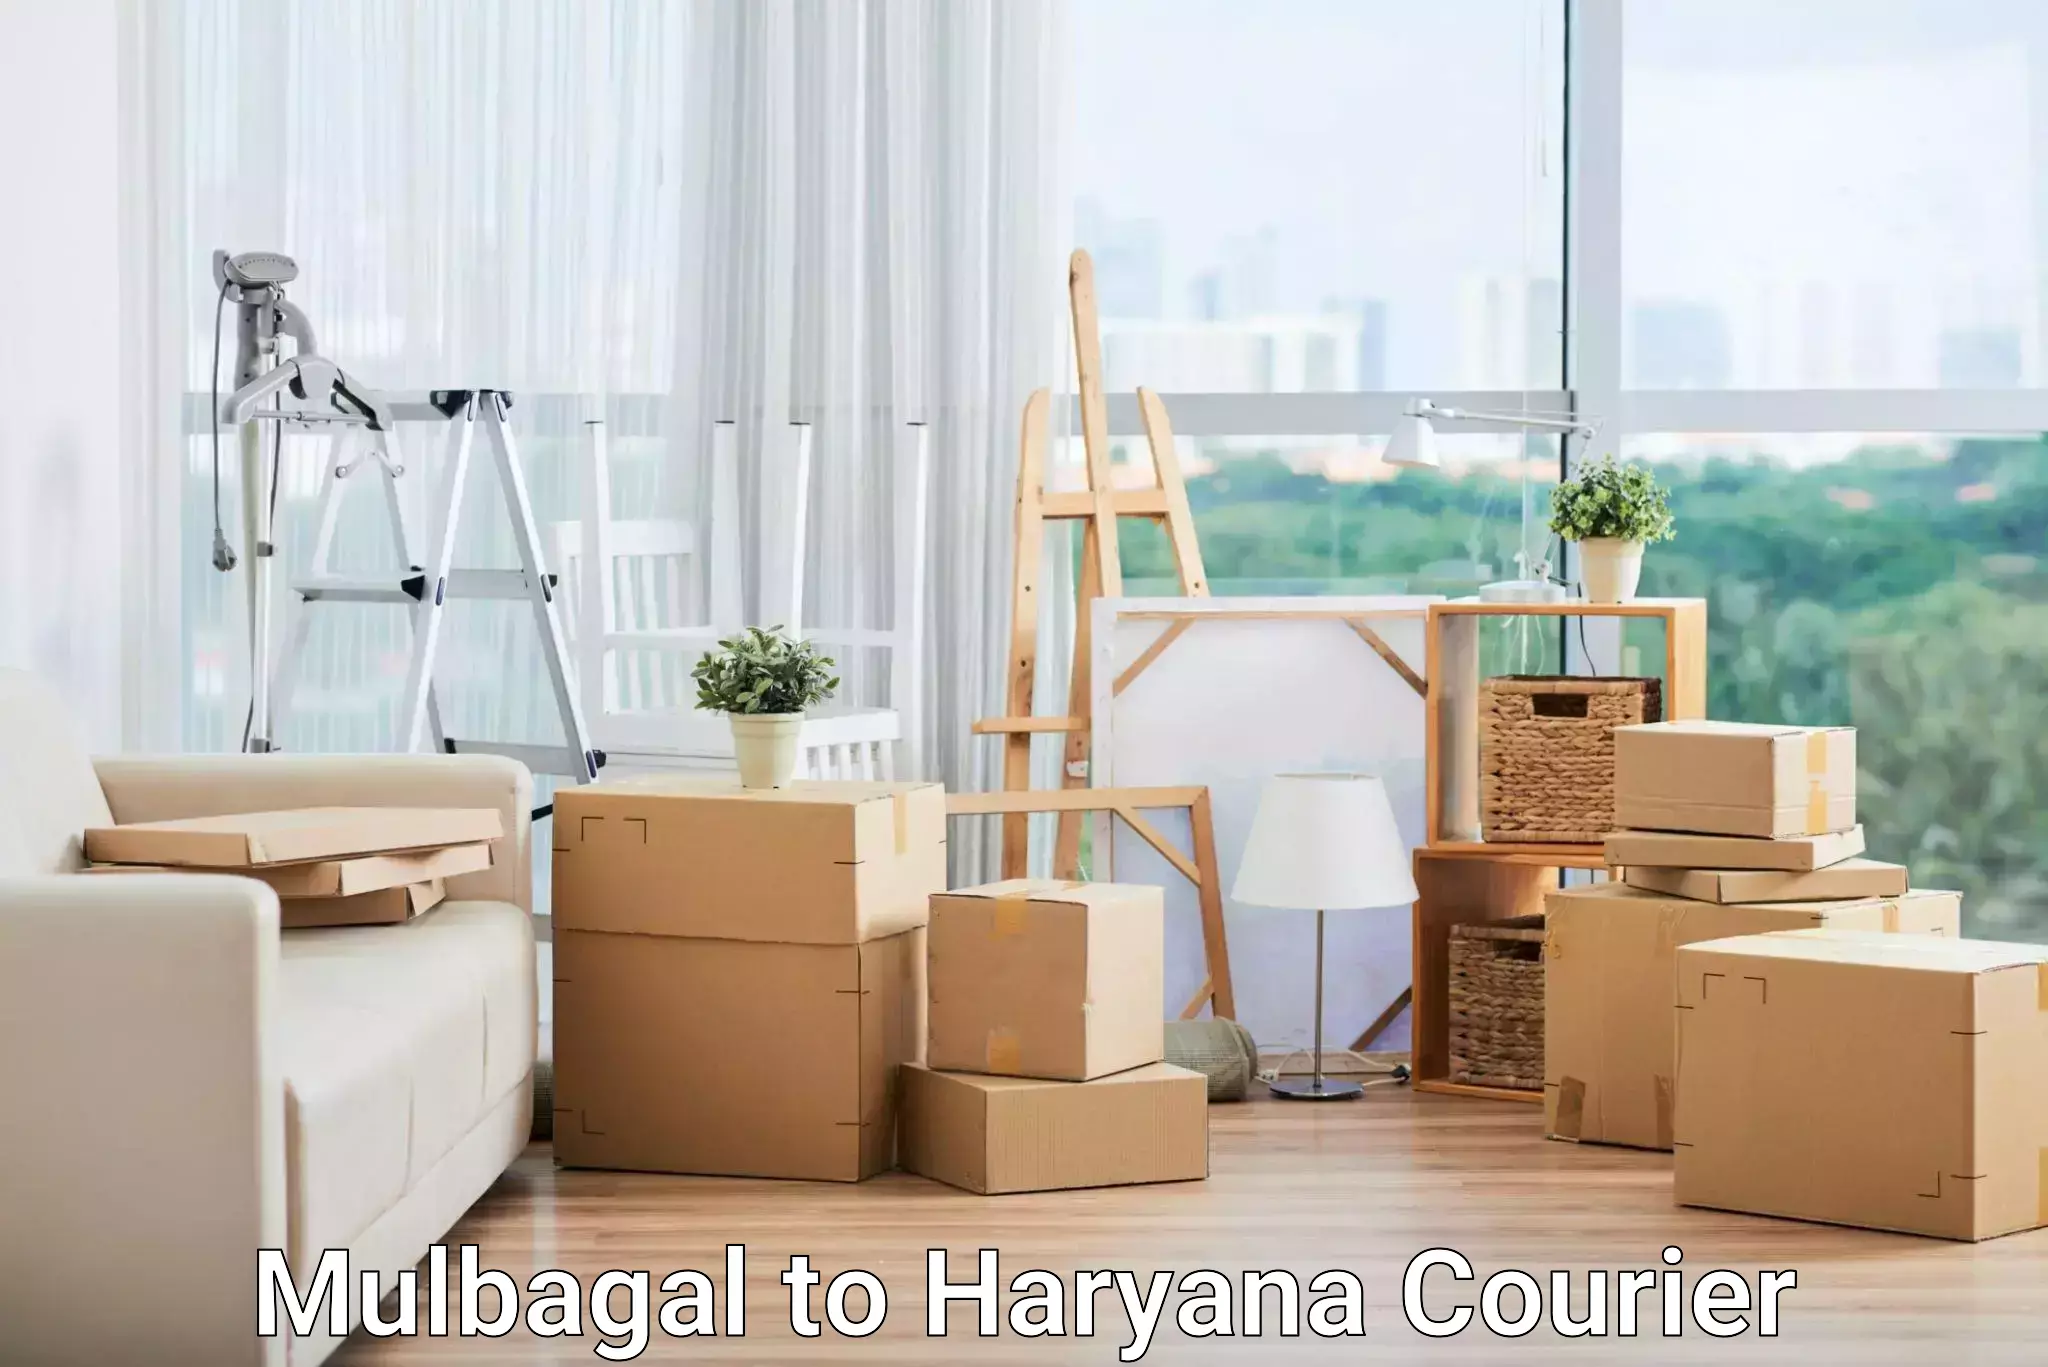 Flexible delivery schedules Mulbagal to NCR Haryana